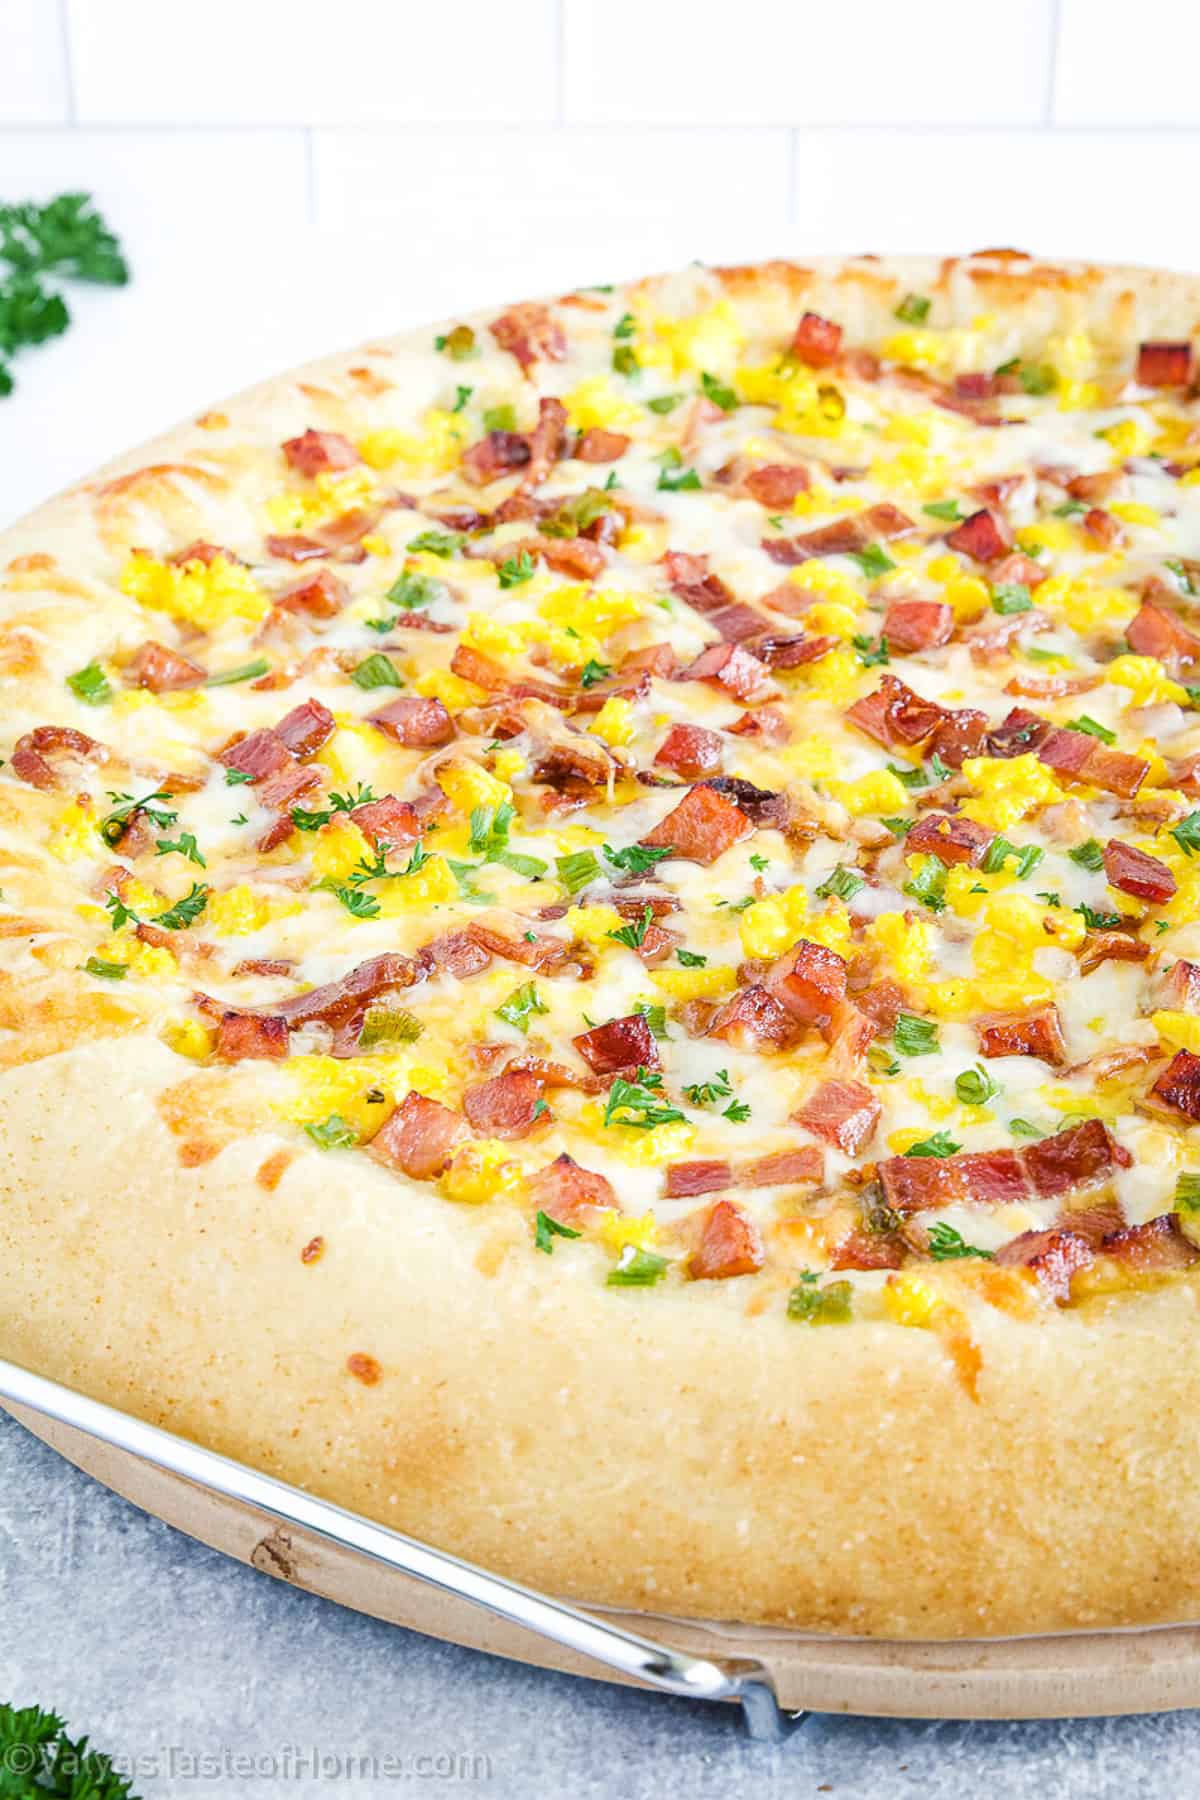 Pizza dish that is typically eaten for breakfast and is topped with breakfast ingredients such as bacon, eggs, cheese, vegetables, and/or sausage.